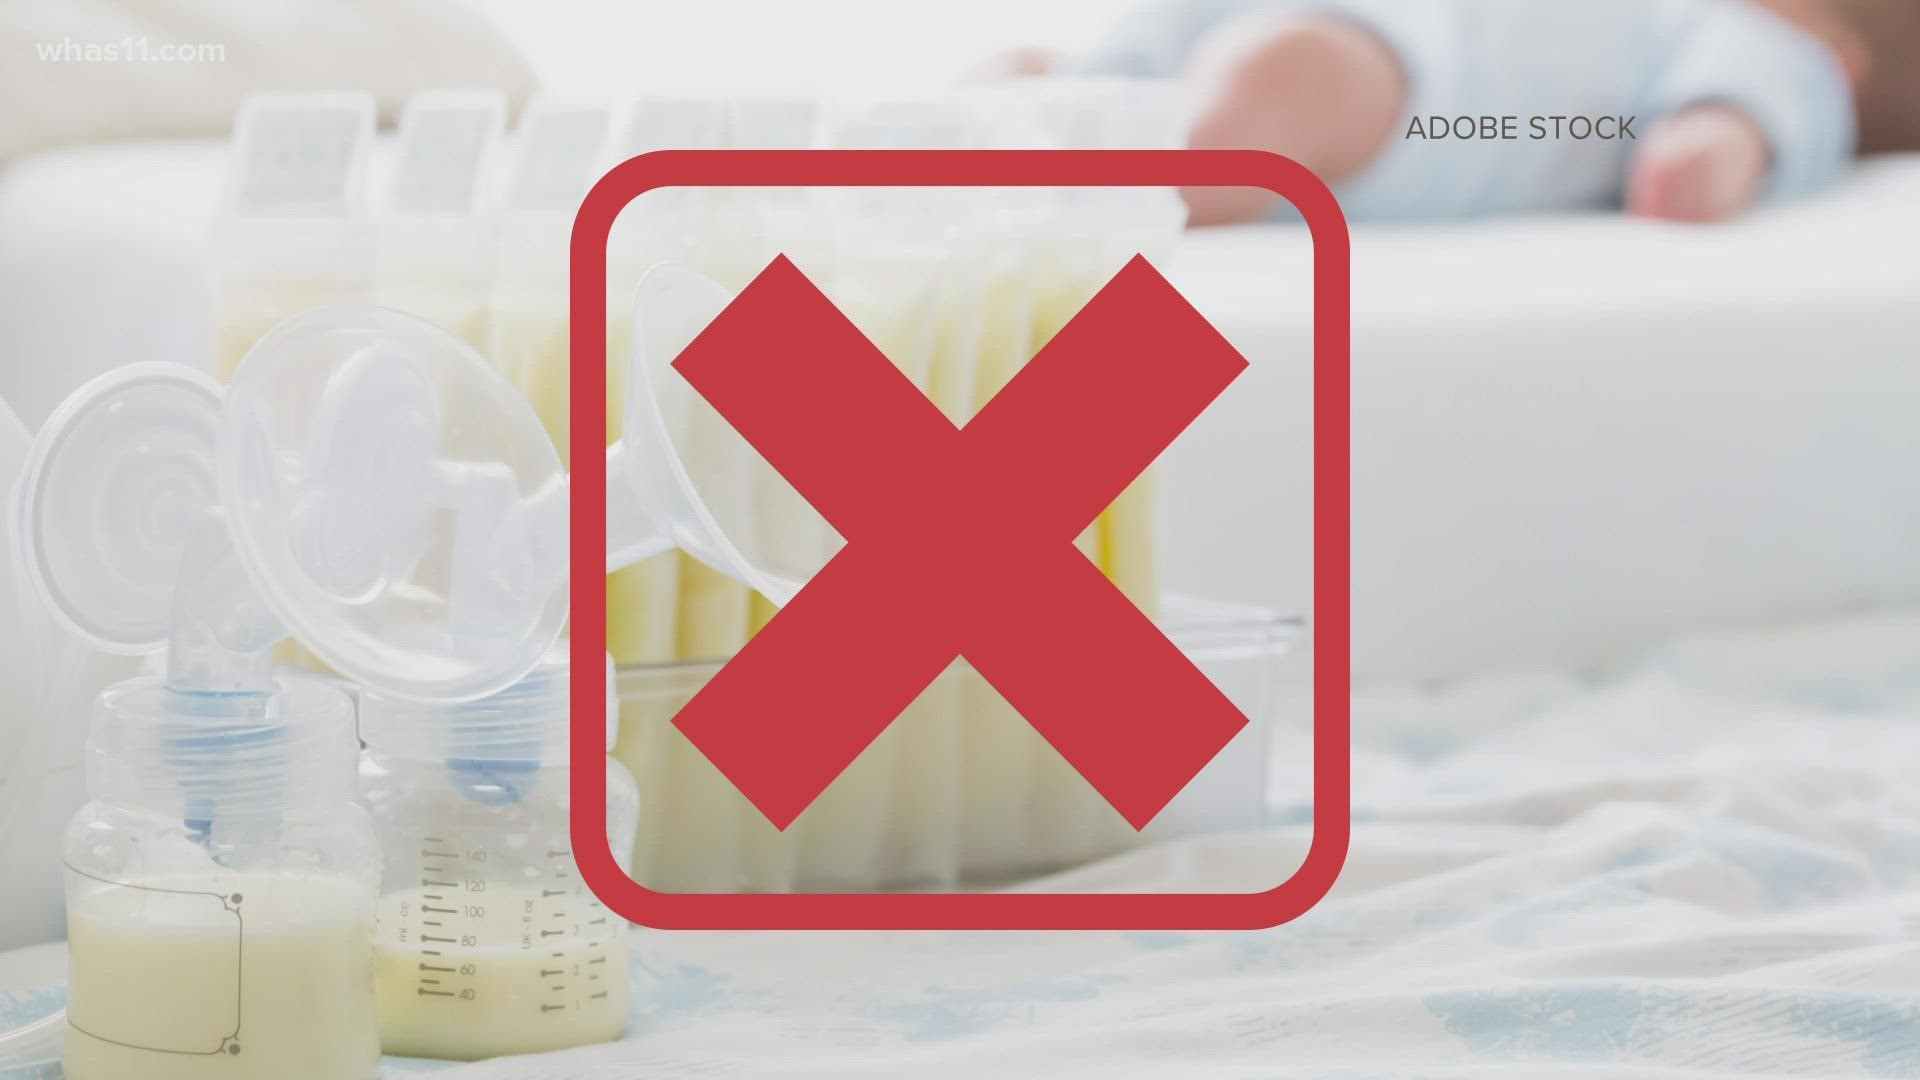 Though breast milk can take on a vast color palette, two health experts said none of their COVID-positive patients have had green breast milk.